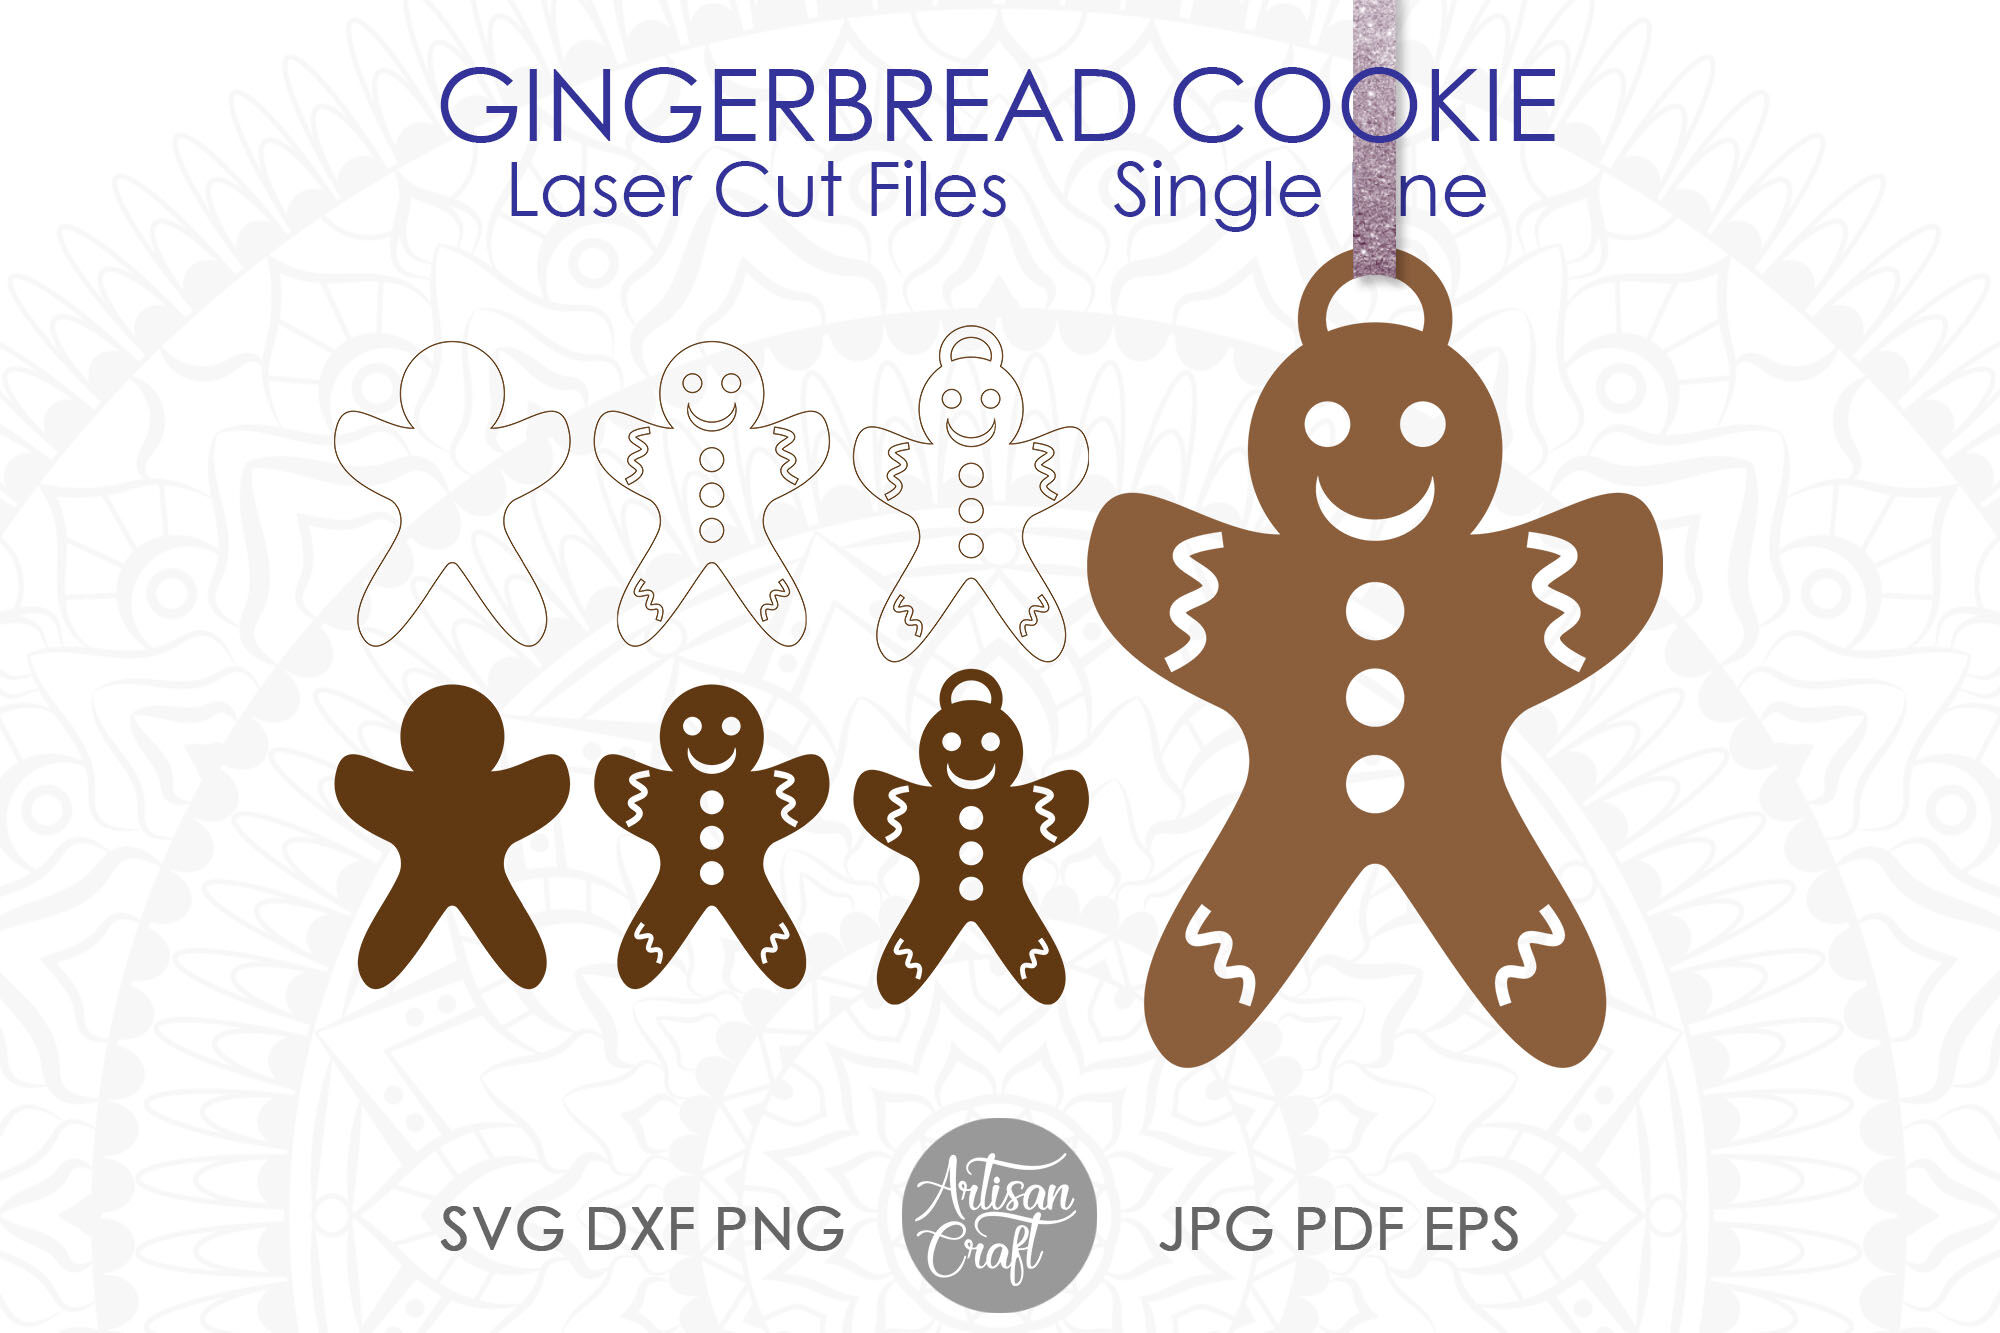 Download Laser Cut Files Instant Download Glowforge Files Svg Dxf Pdf Ai Gingerbread Cookies Christmas Ornaments Bundle Drawing Illustration Digital Leadcampus Org